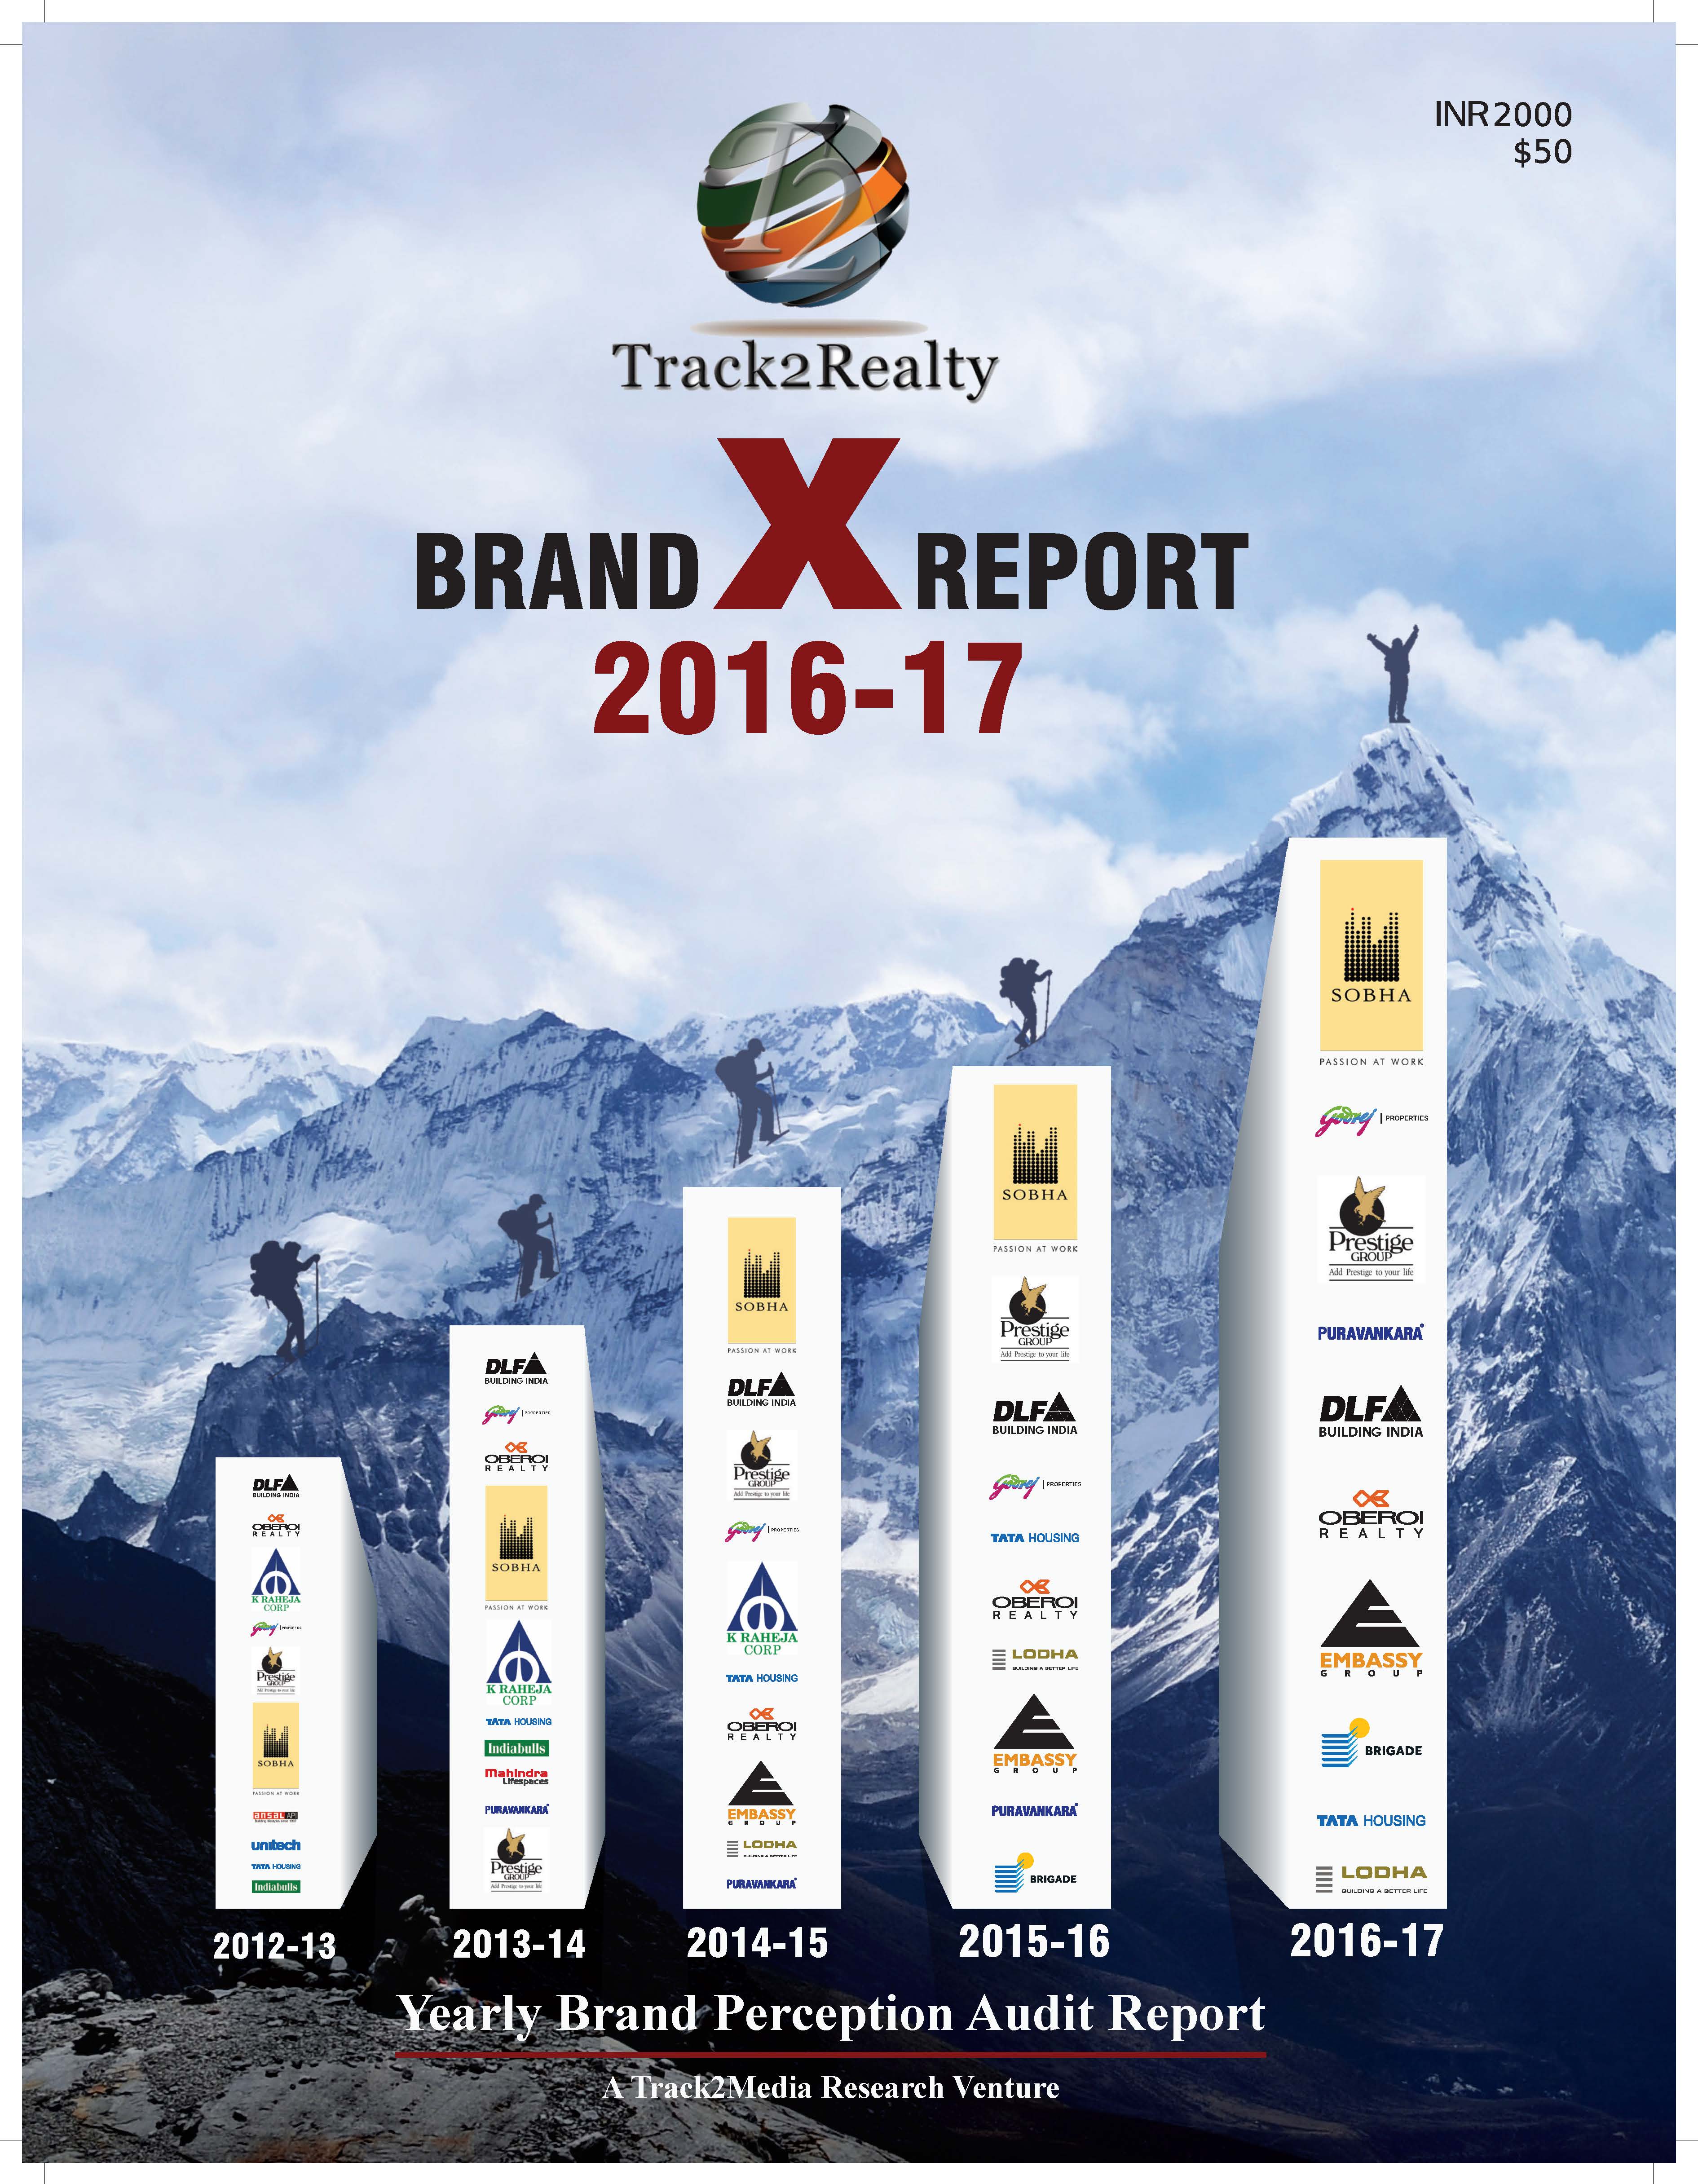 Track2Realty Brand X Report 2016-17, Brand perception audit report, Brand rating of Indian developers, India real estate news, Indian property market, Track2Realty